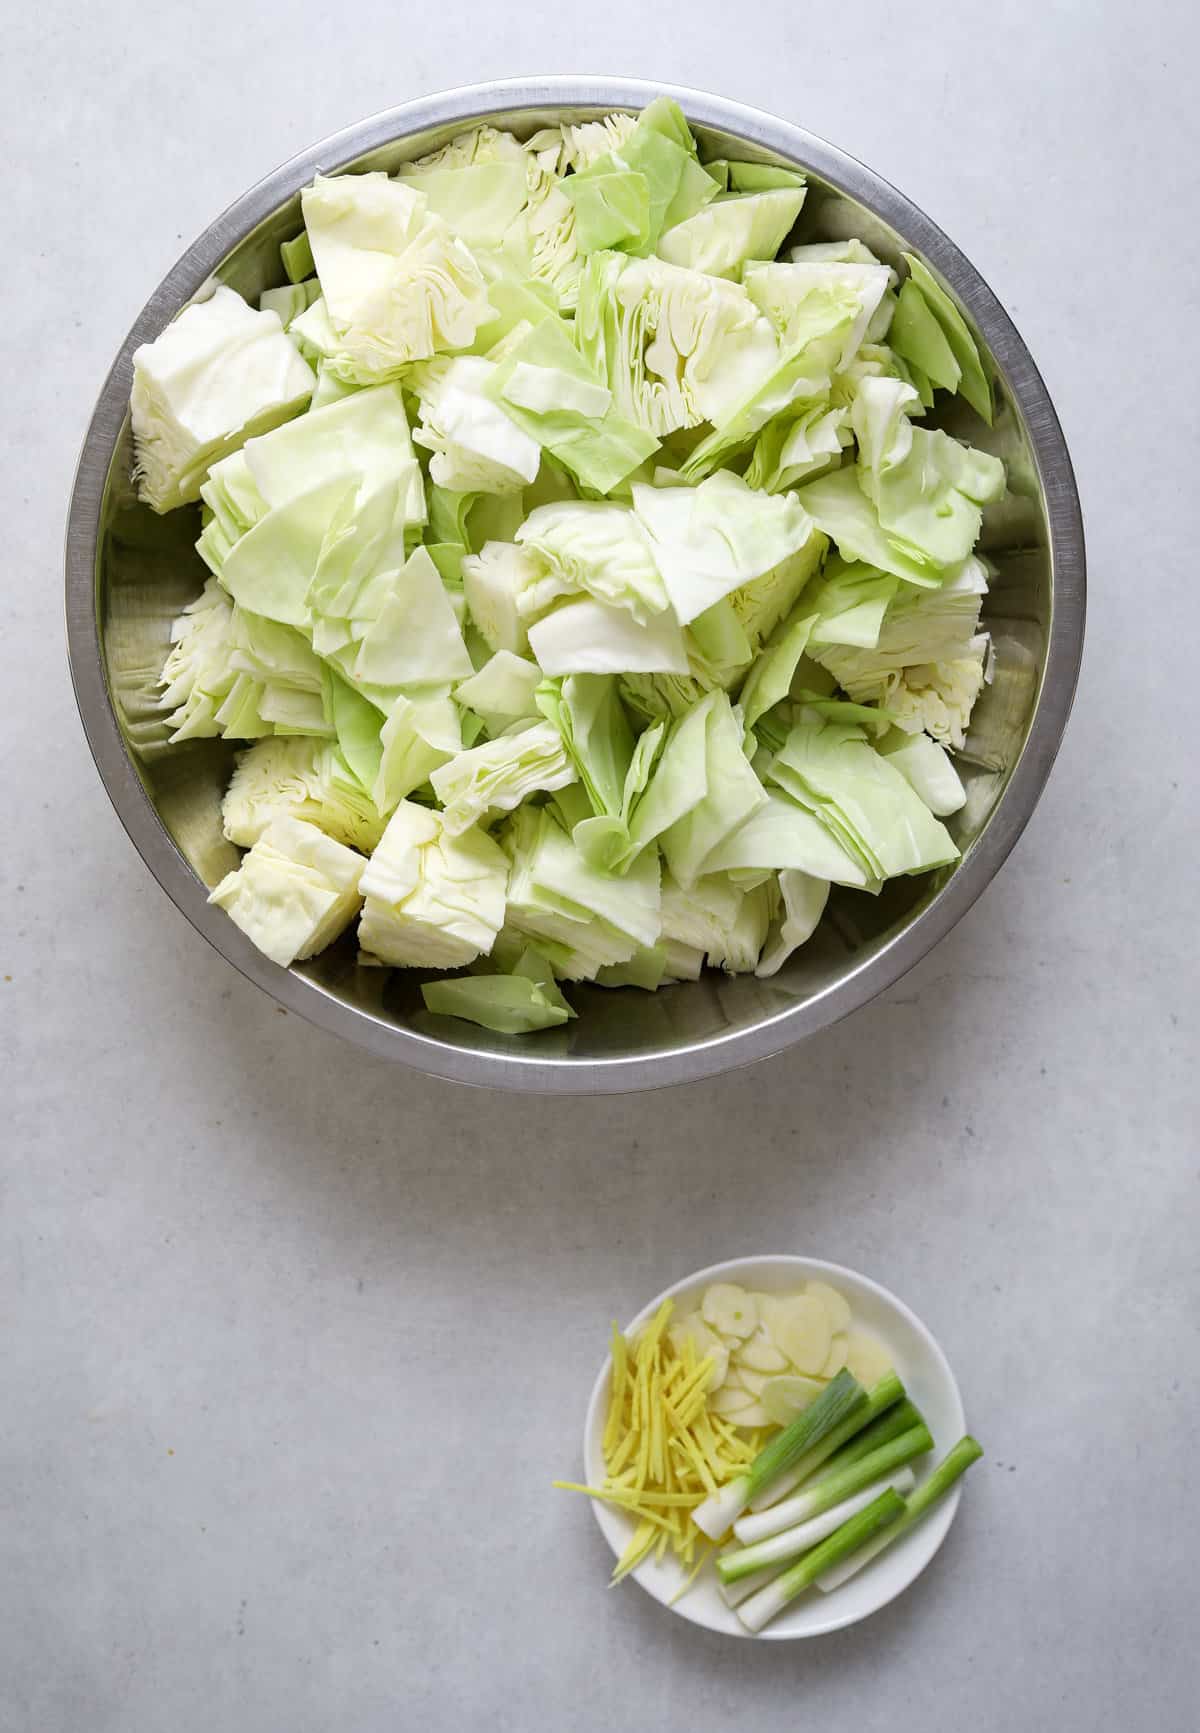 A mixing bowl with chopped cabbage and a small plate with slivered garlic, ginger and green onion.